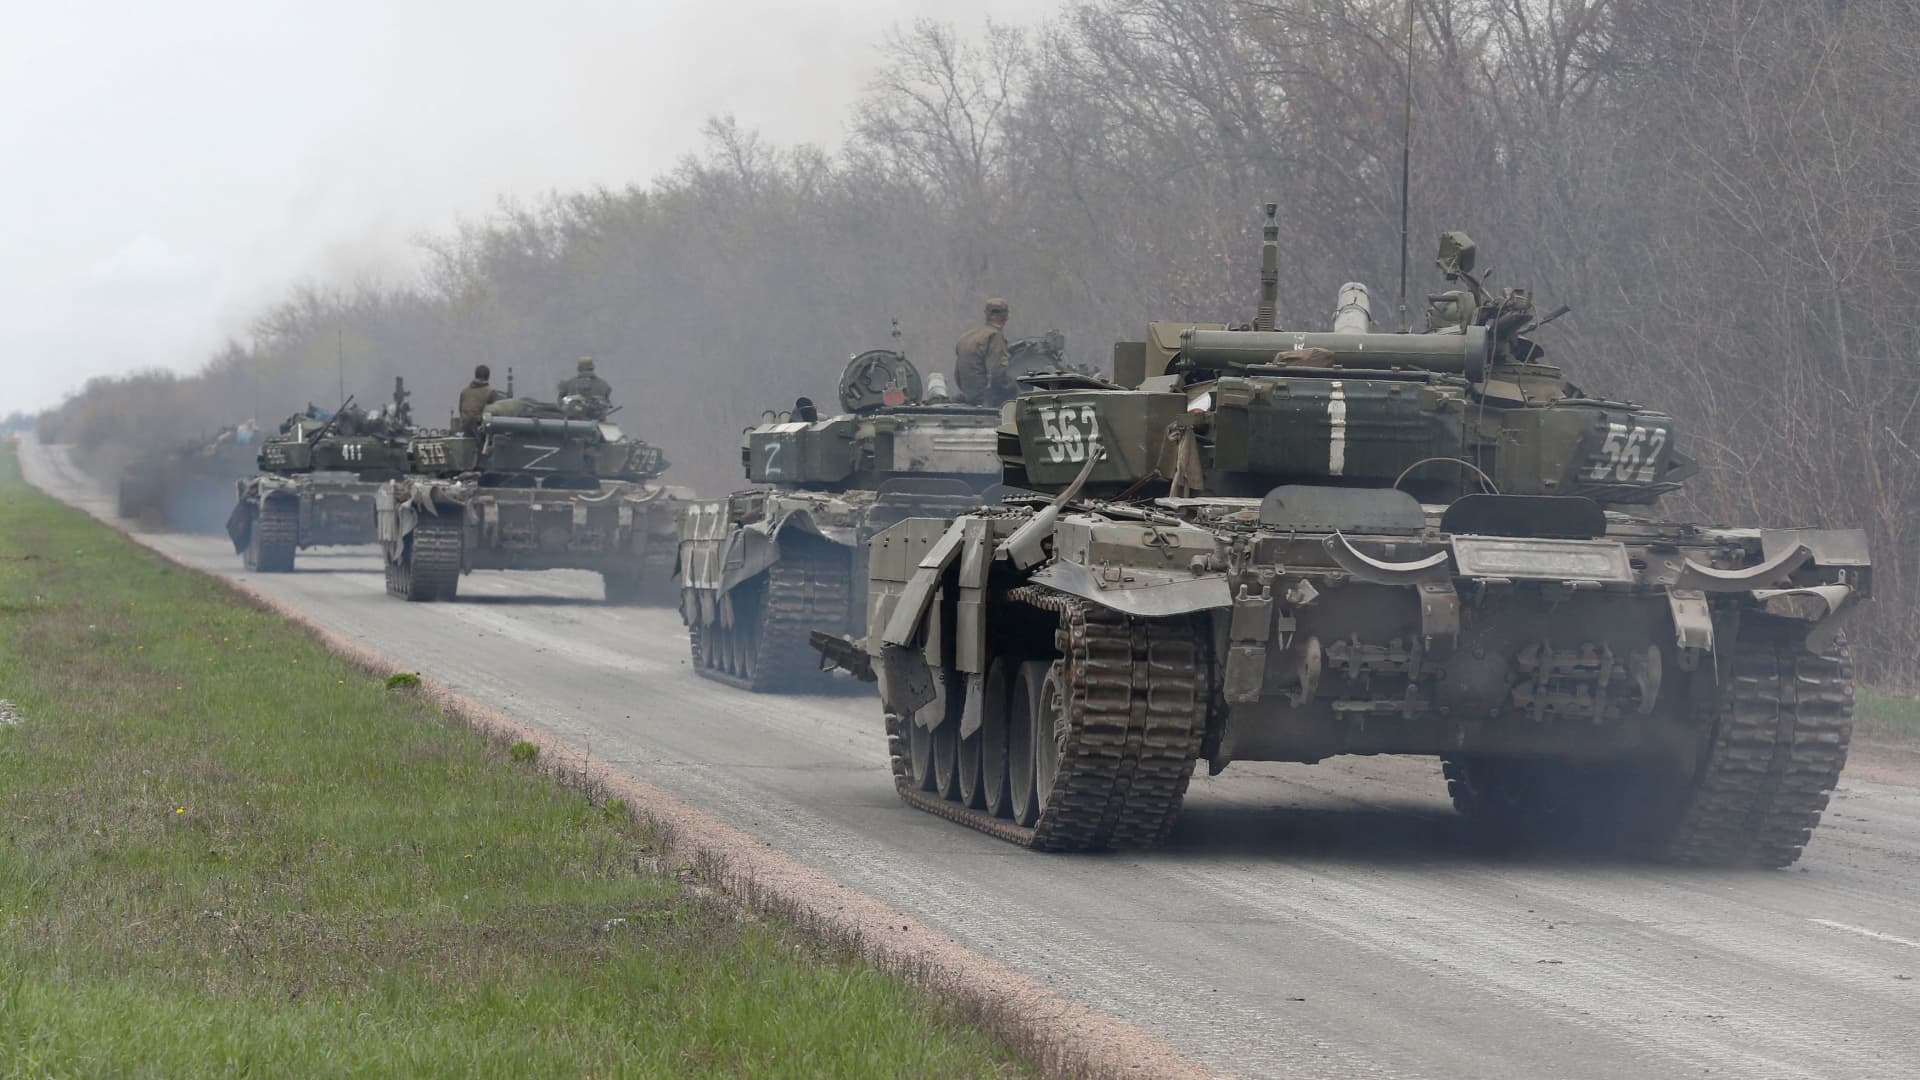 Tanks of pro-Russian troops drive along a road during Ukraine-Russia conflict in Ukraine April 17, 2022.